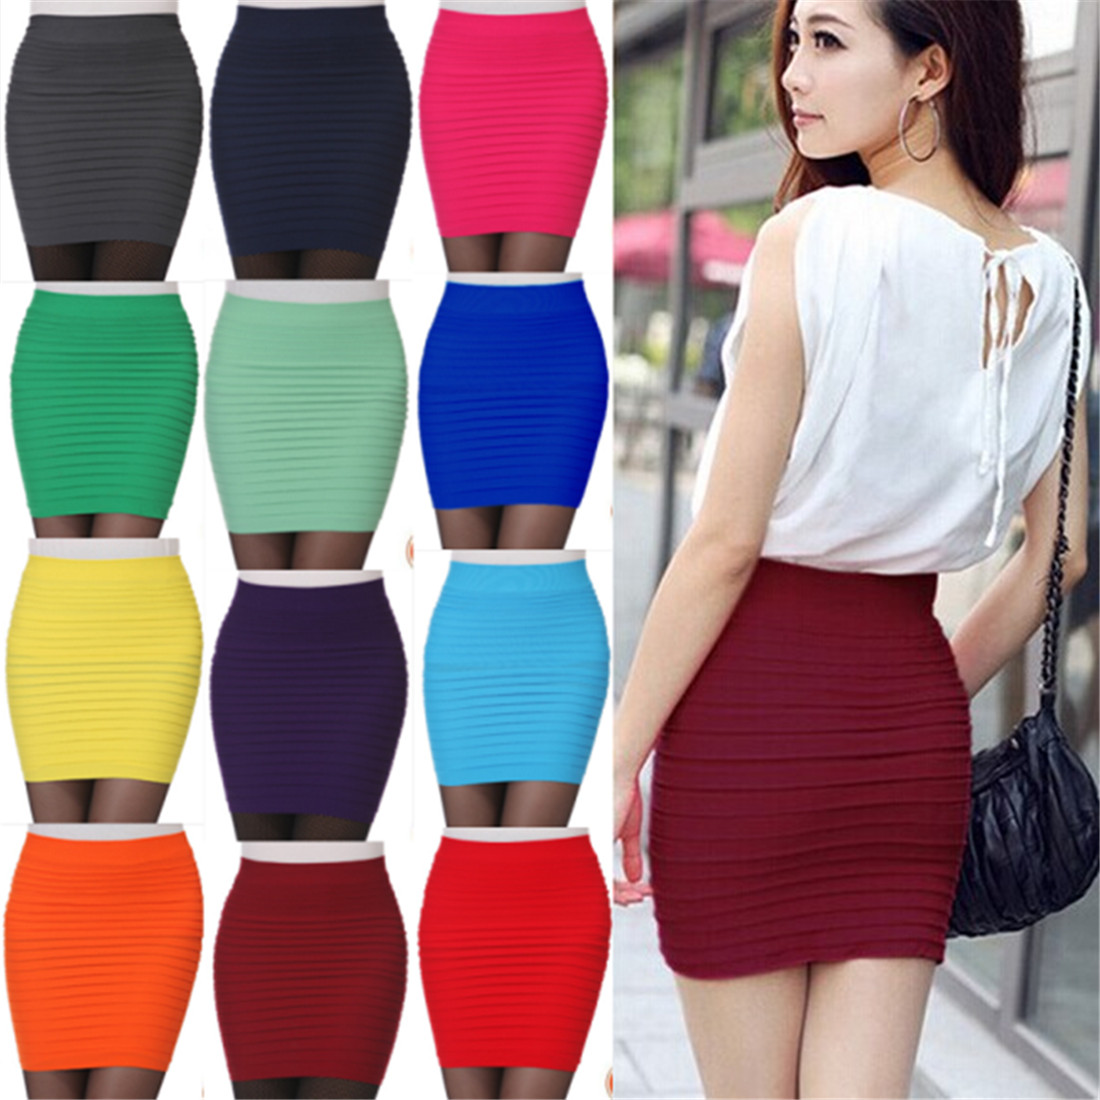 Elastic Pleated Skirt High Waist Bodycon Mini Skirt Business Office Cheap  Short Pencil Skirts Solid Color Pink Black Blue Hot - Price history &  Review | AliExpress Seller - QueenFashion Store | Alitools.io